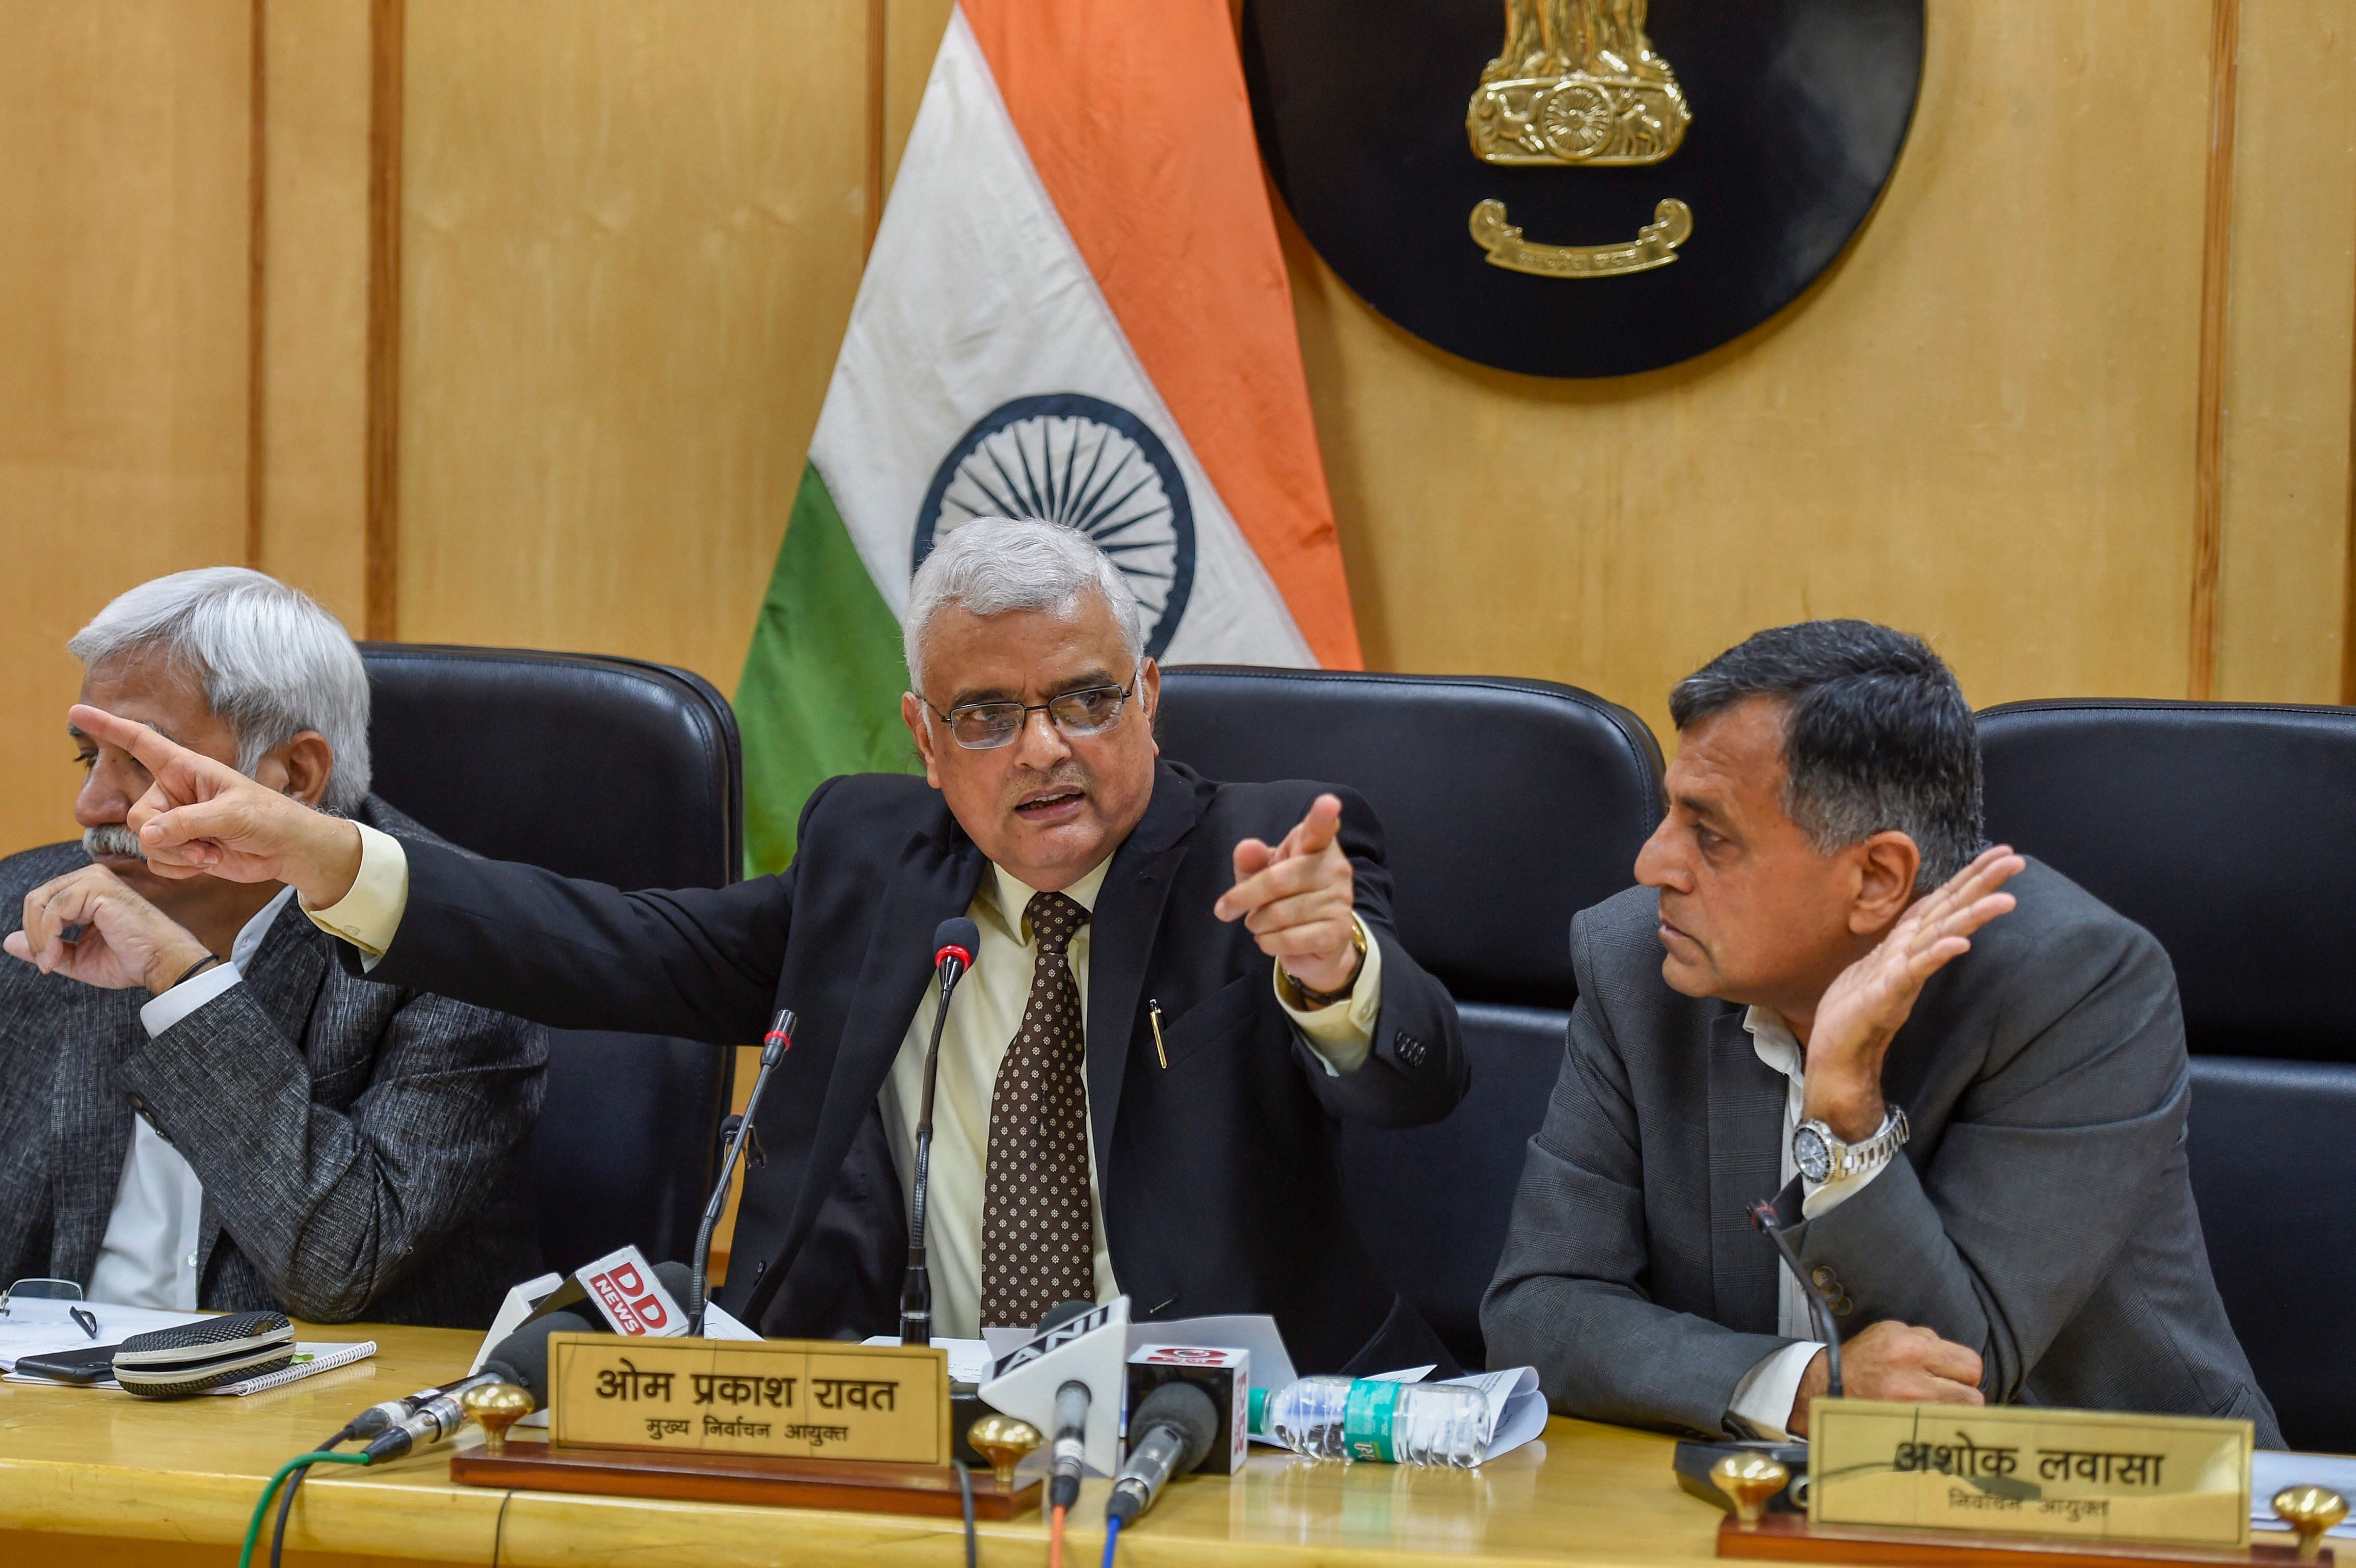 Chief Election Commissioner OP Rawat flanked by Election Commissioners Sunil Arora (L) and Ashok Lavasa (R) address a press conference to announce the dates for Assembly elections in five states, in Delhi, on Saturday. PTI